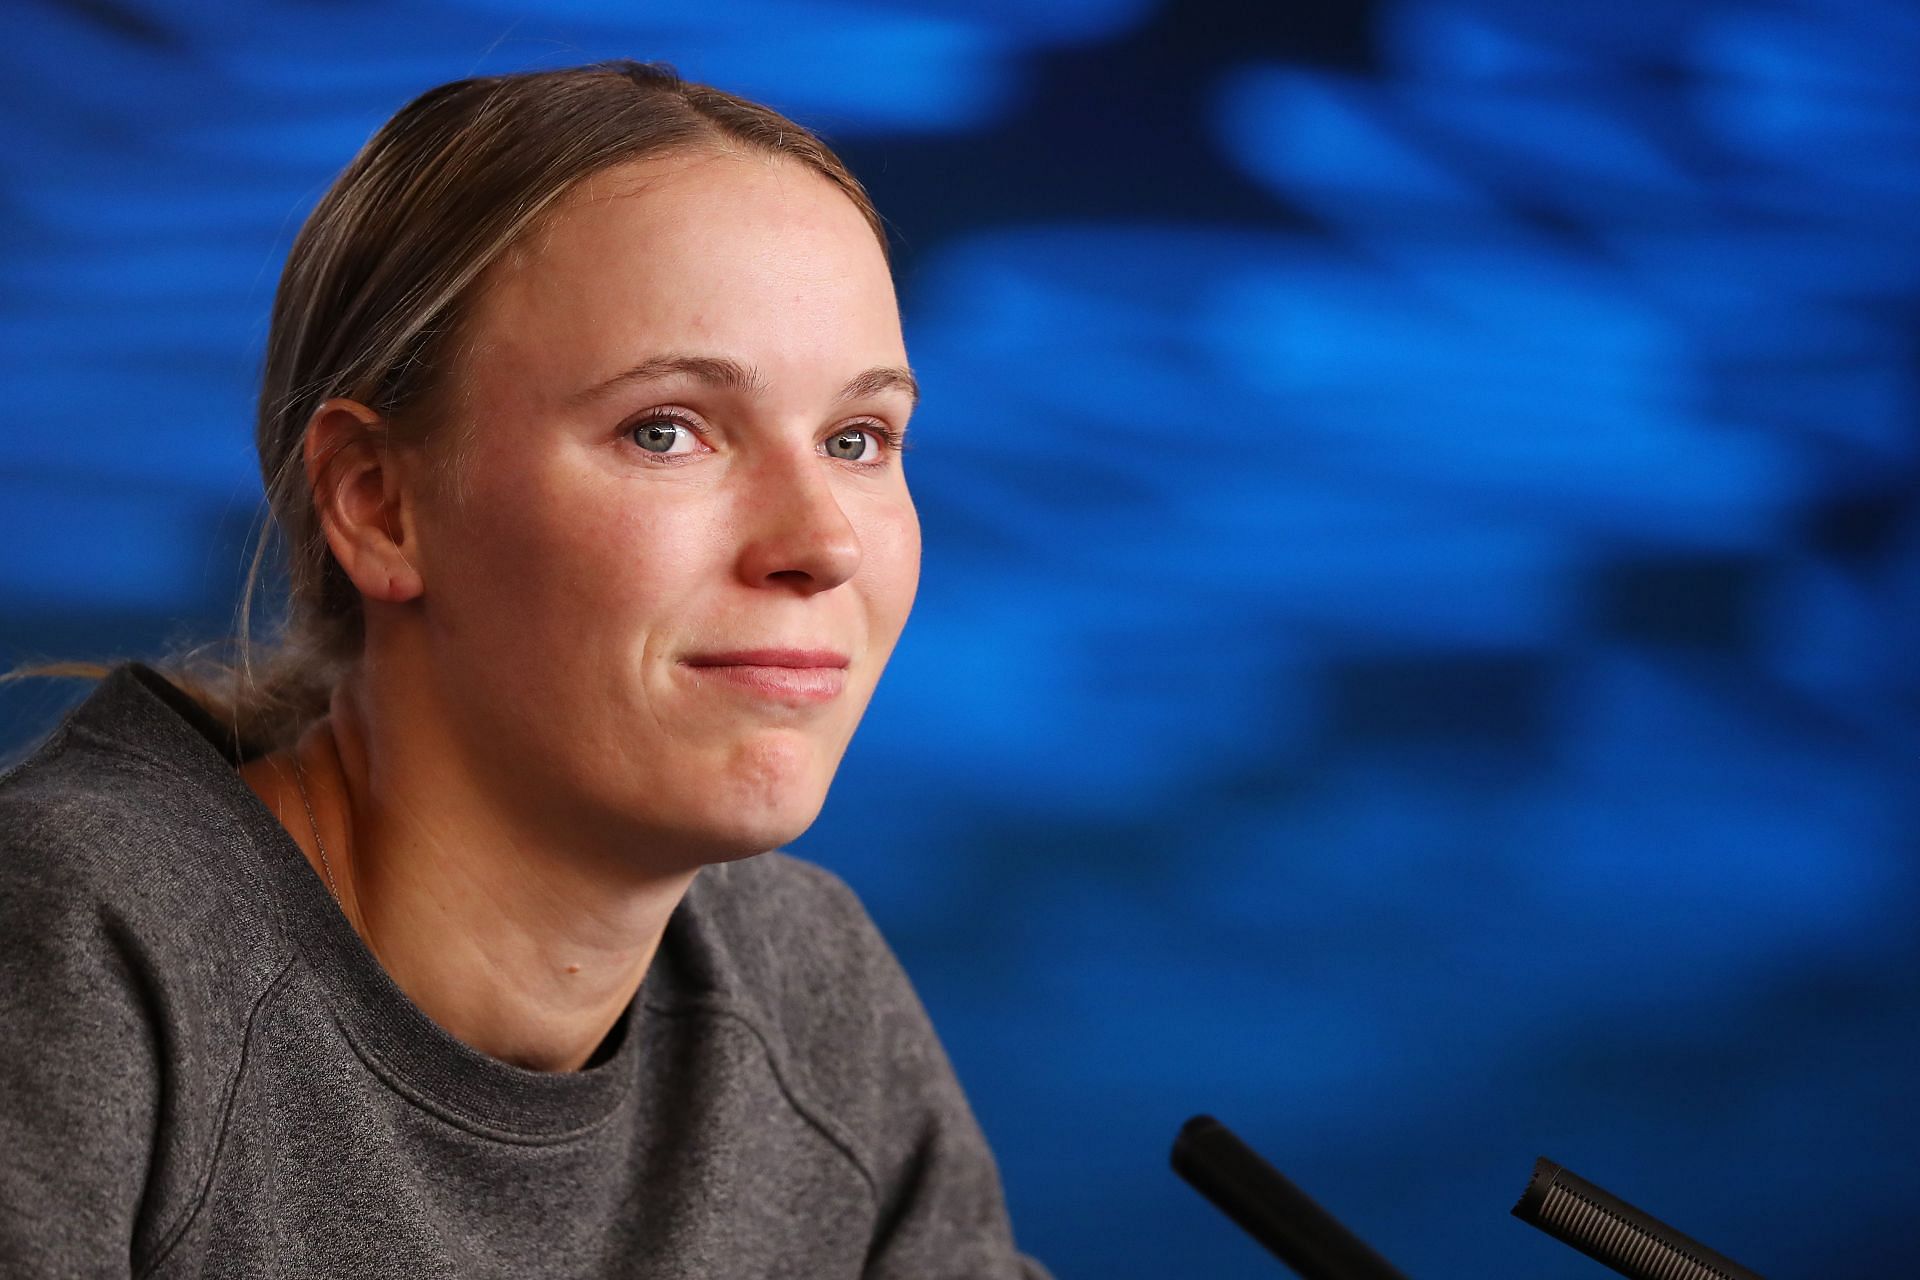 Caroline Wozniacki pictured during a press conference at the 2020 Australian Open